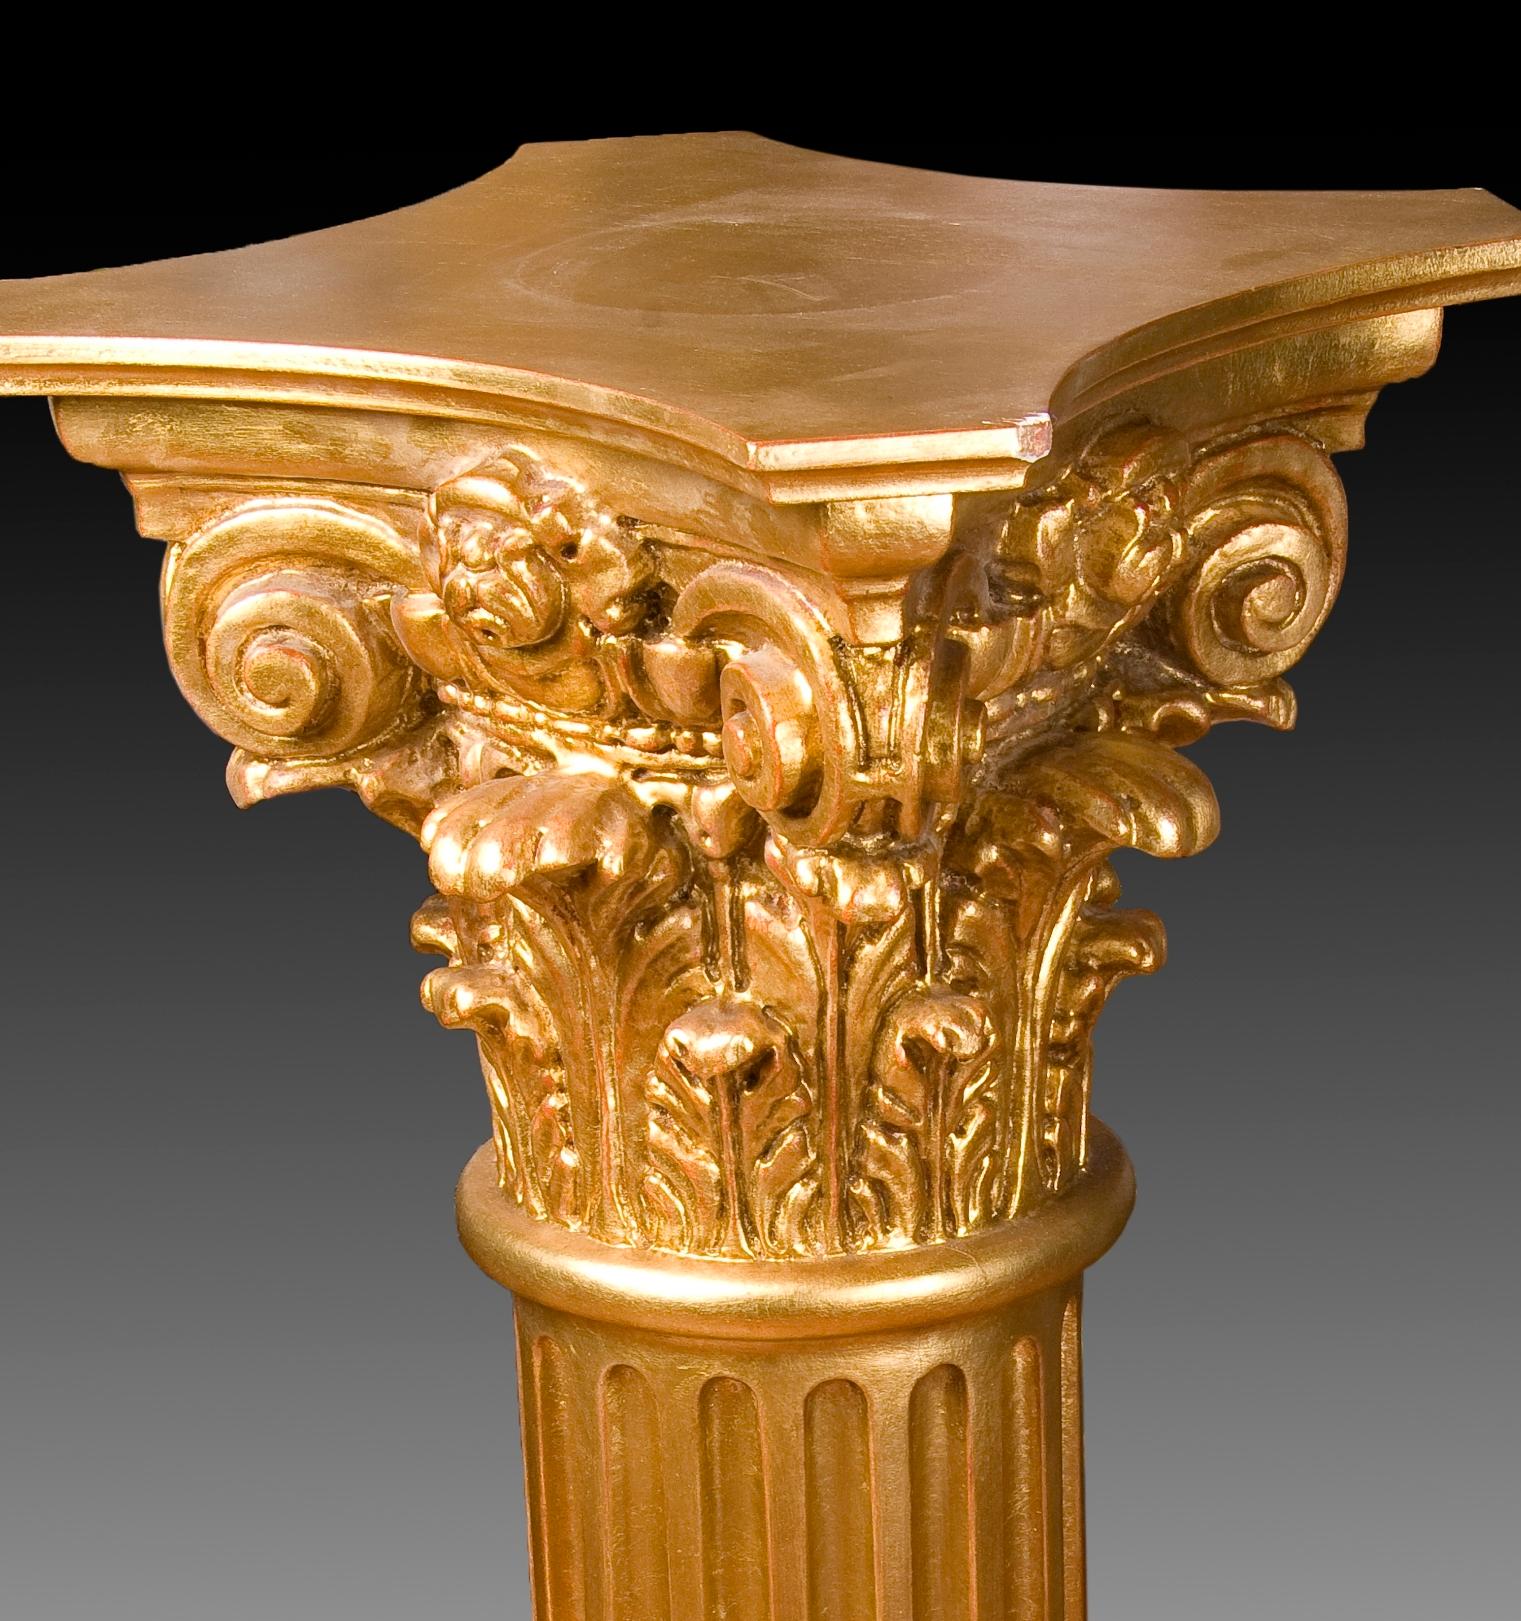 Column-shaped base. Gilded wood. Twentieth century.
 Carved and gilded wooden base composed of a square base, a column base with smooth moldings, a fluted shaft and a Corinthian capital with acanthus leaves, a decorative element between the